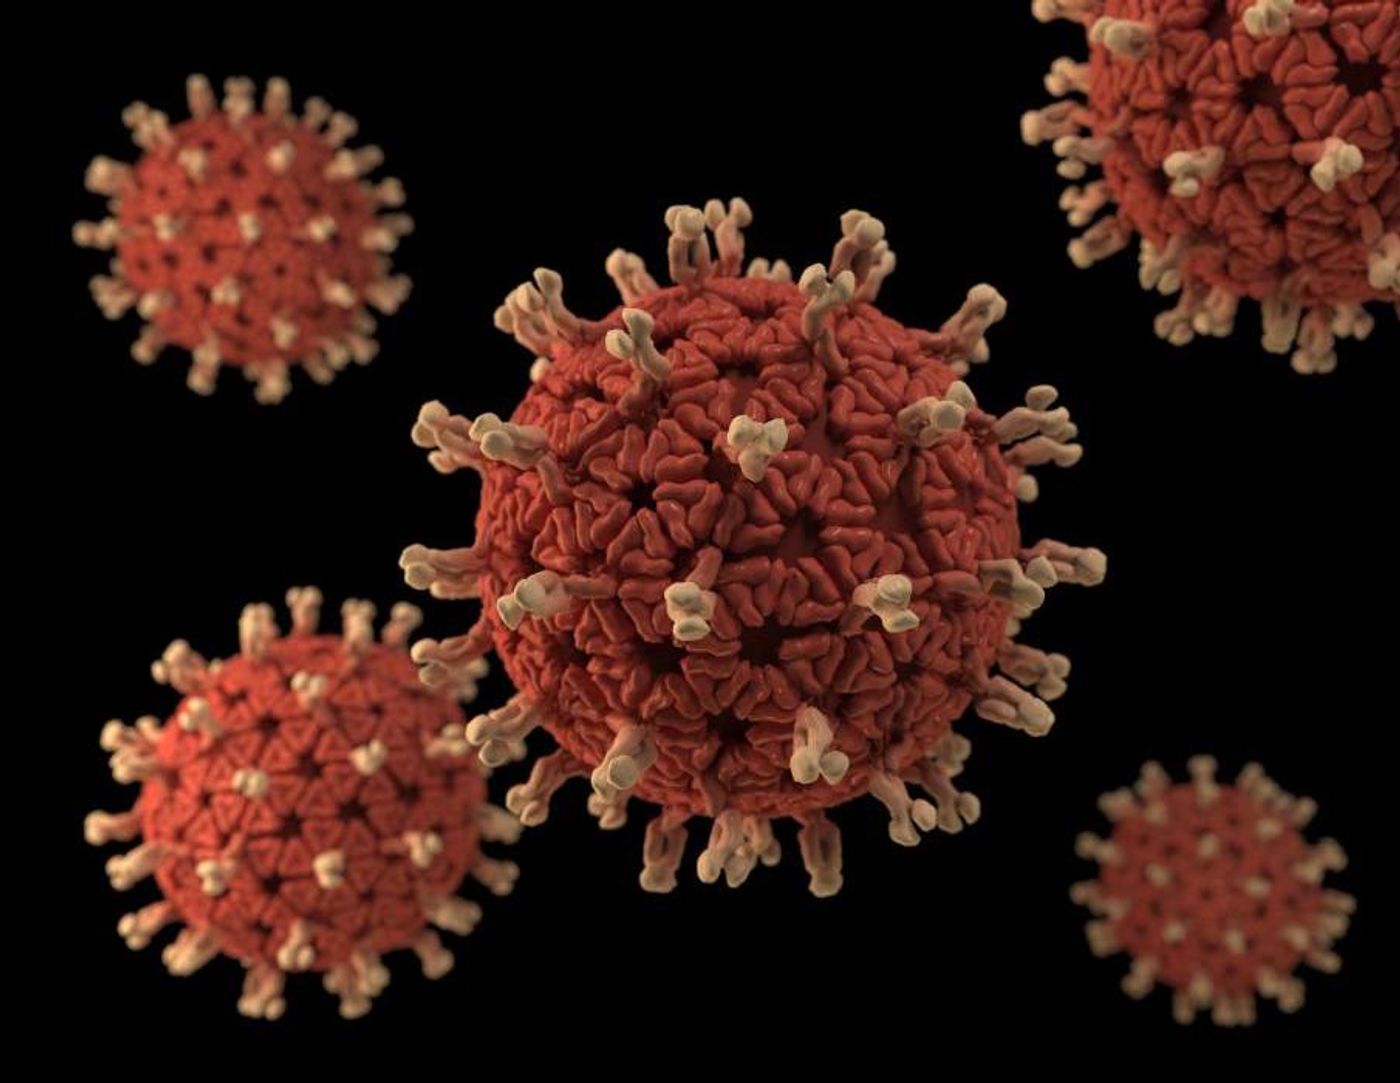 A 3D graphical representation of a number of Rotavirus virions set against a black background. The characteristic wheel-like appearance gives the Rotavirus its name, which is derived from the Latin rota, meaning "wheel". Rotaviruses are nonenveloped, double-shelled viruses, making them quite stable in the environment. / Credit: CDC/Jessica A. Allen / Illustrator: Alissa Eckert, MS